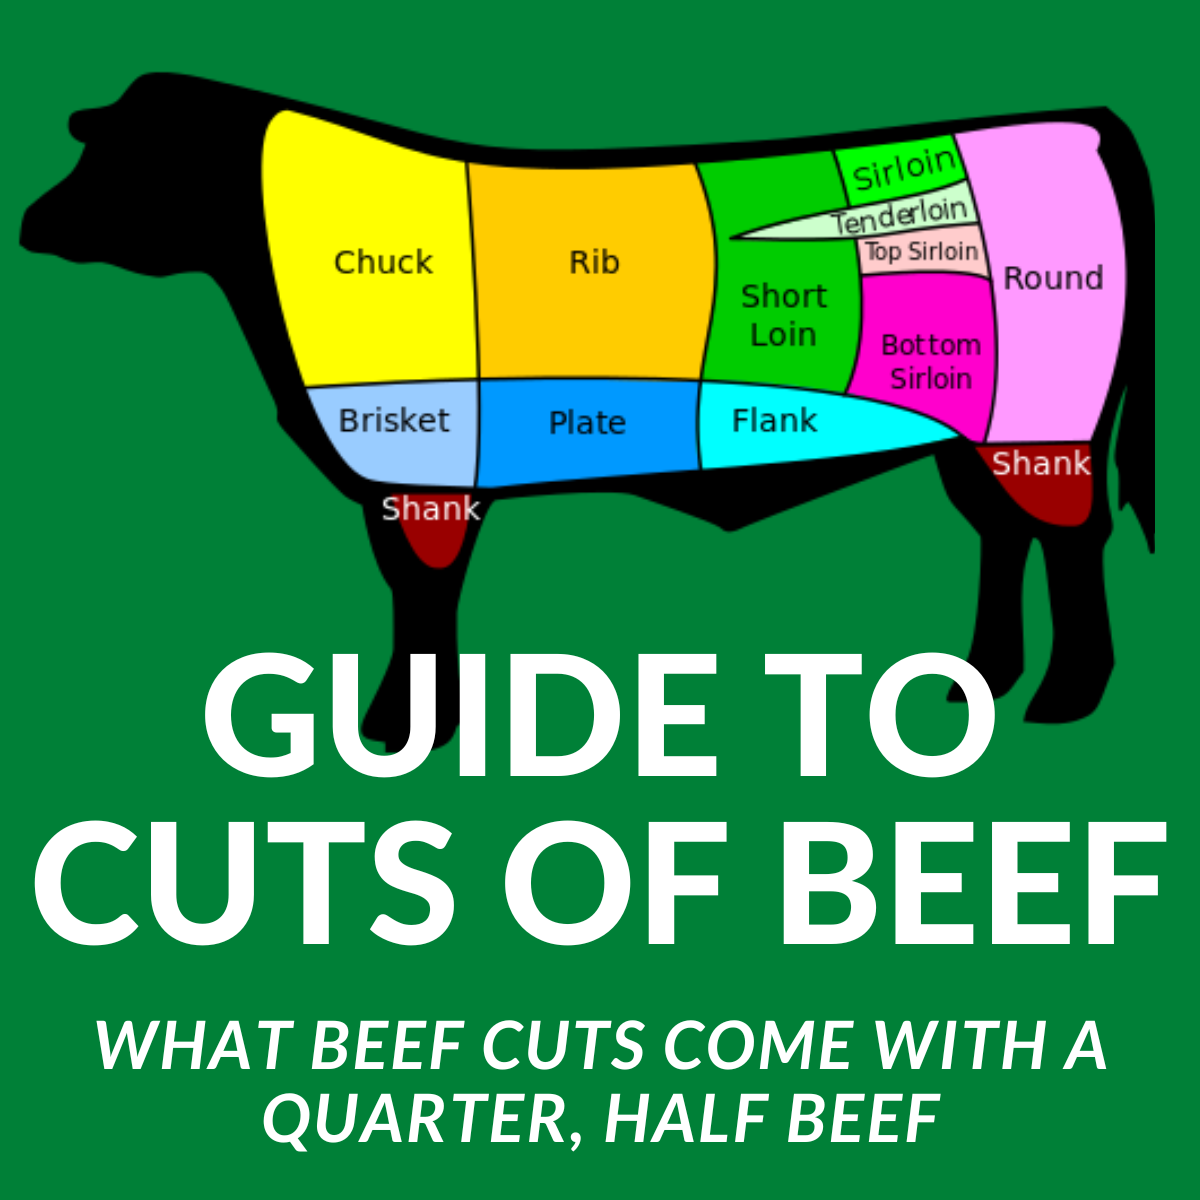 Beef Cuts: Loin, Rib, Sirloin - Guide To Different Cuts of Beef